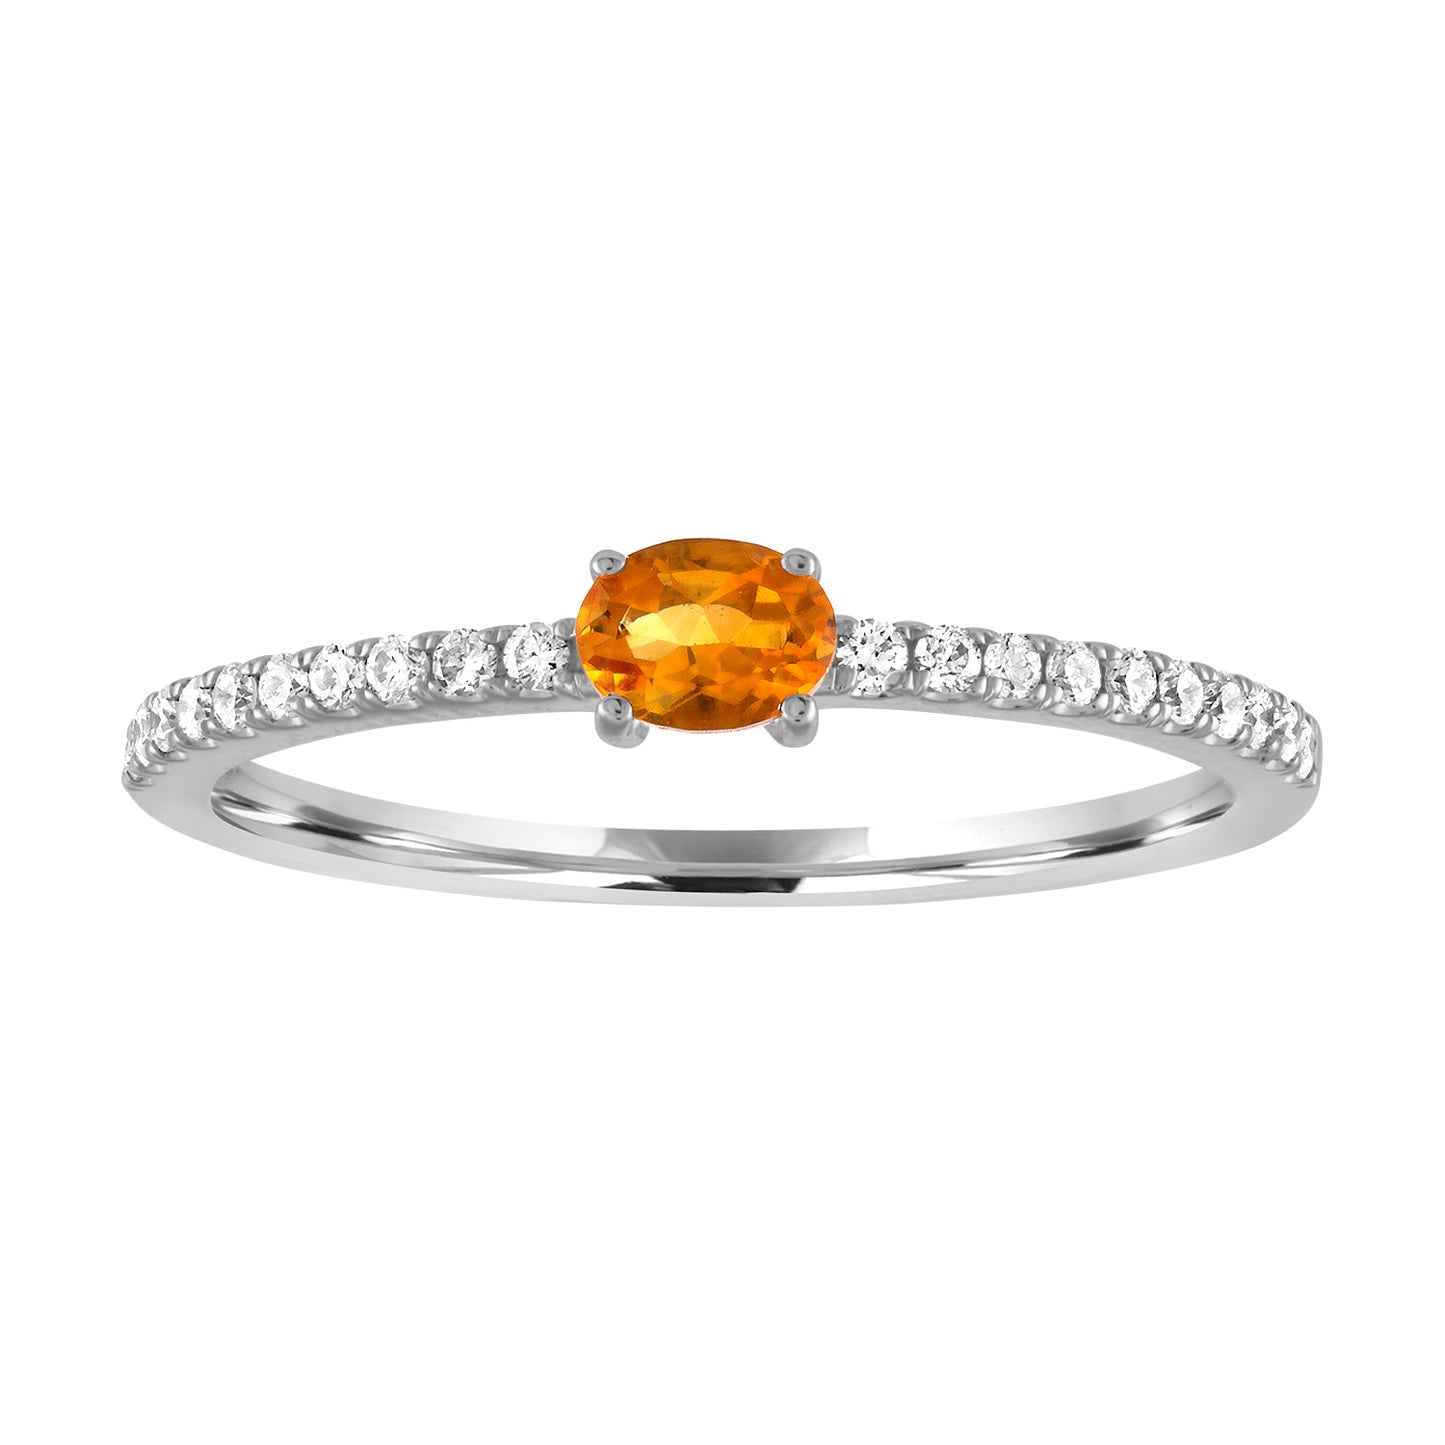 White gold skinny band with an oval citrine in the center and round diamonds along the shank.